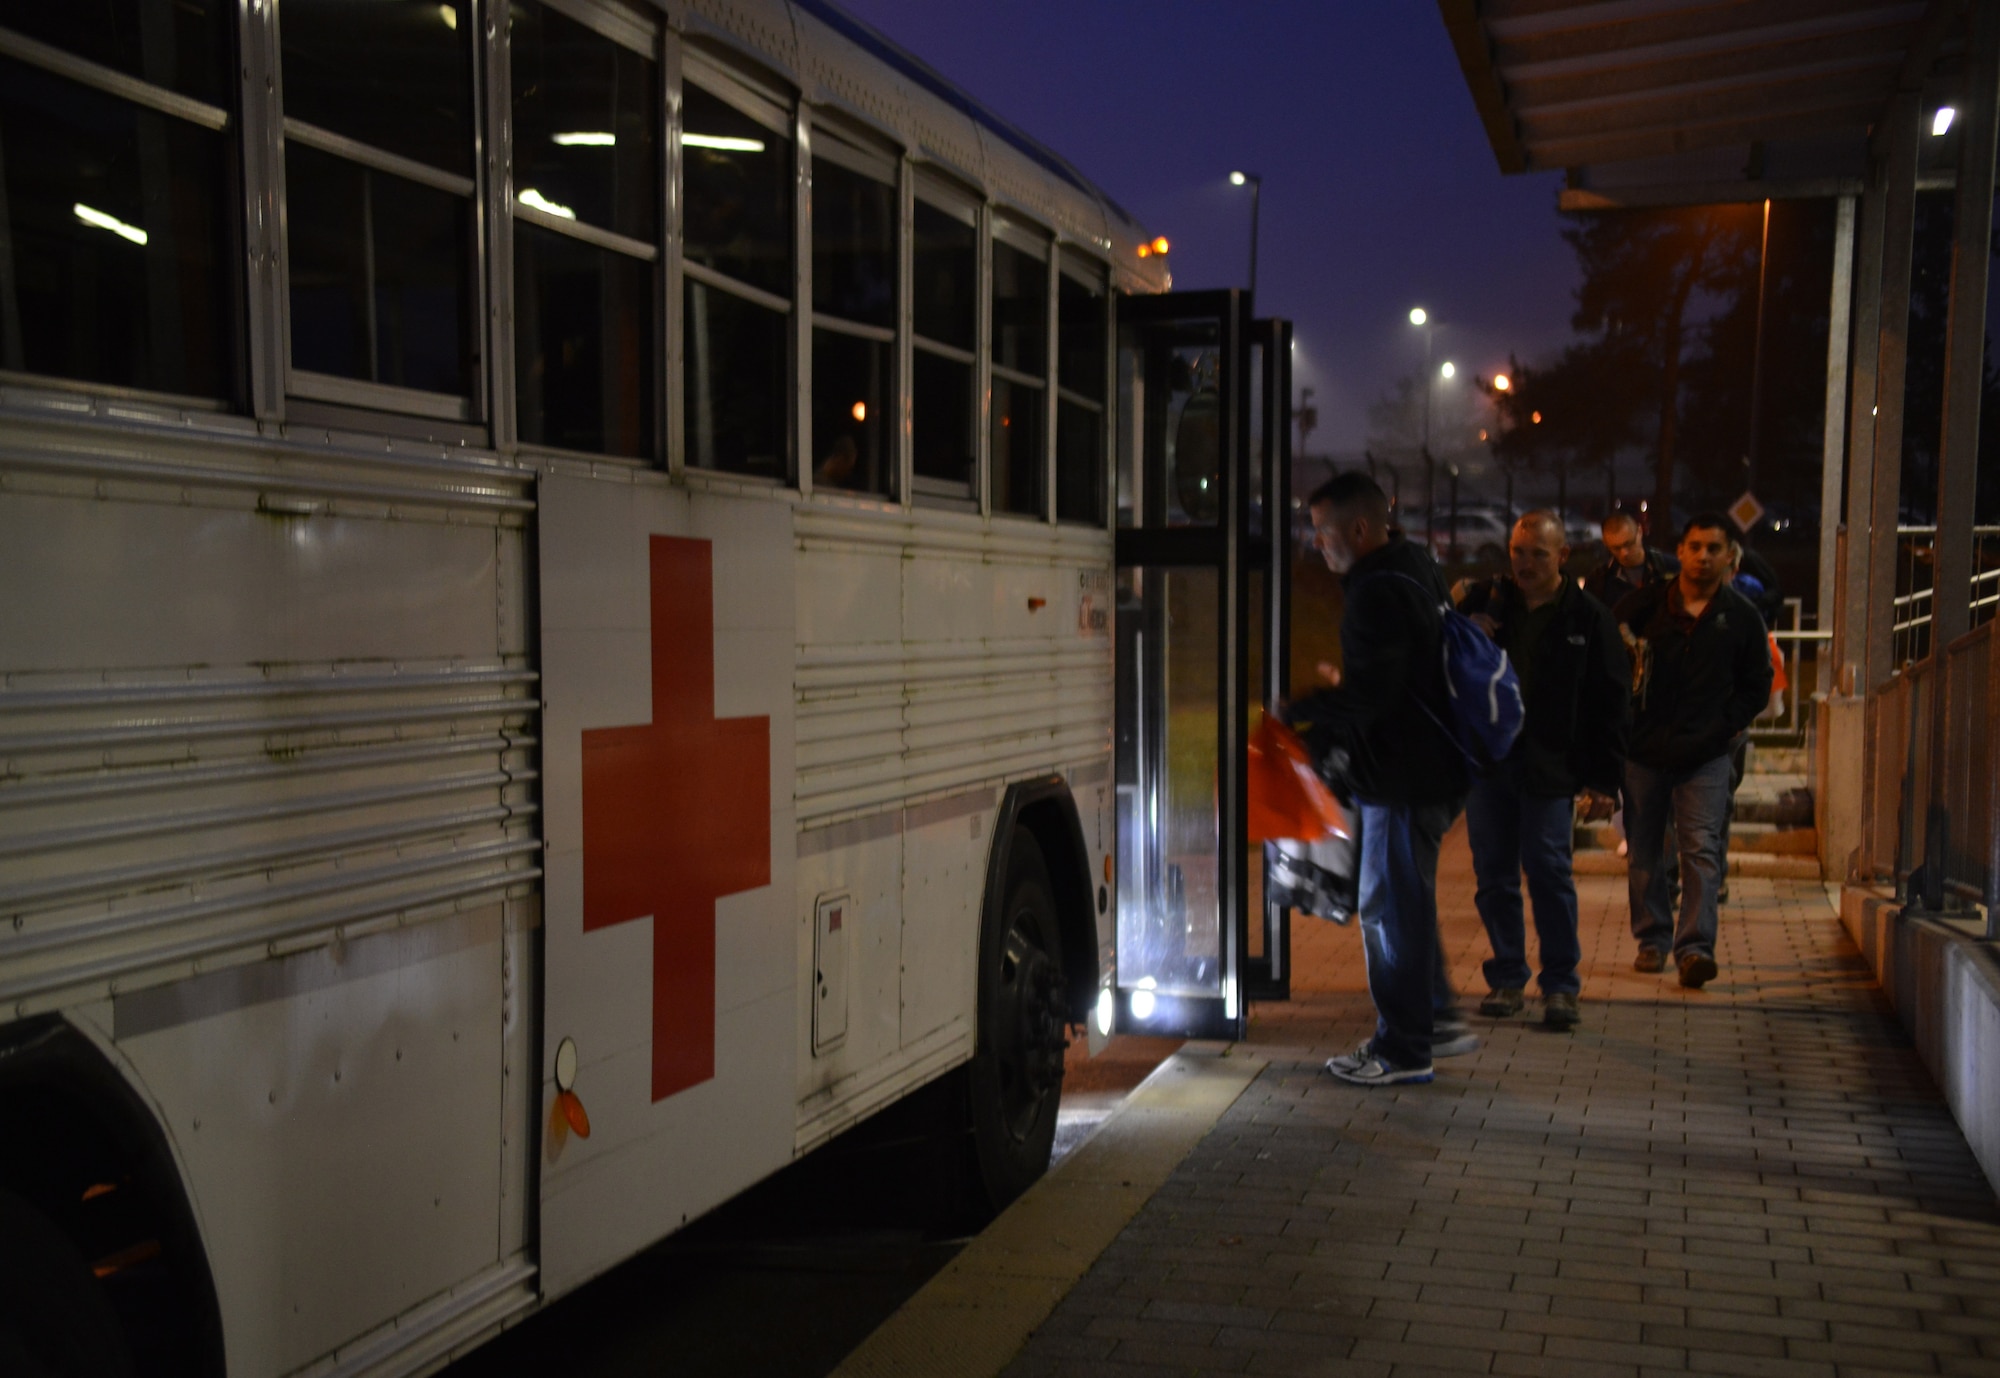 A group of wounded warriors load a medical bus on Landstuhl Regional Medical Center to be taken to Ramstein Air Base, Germany, Nov. 20, 2014. Airmen at the Contingency Aeromedical Staging Facilty ensure those injured down range have a smooth transition back home and into the arms of their loved ones. (U.S. Air Force photo/Senior Airman Hailey Haux)